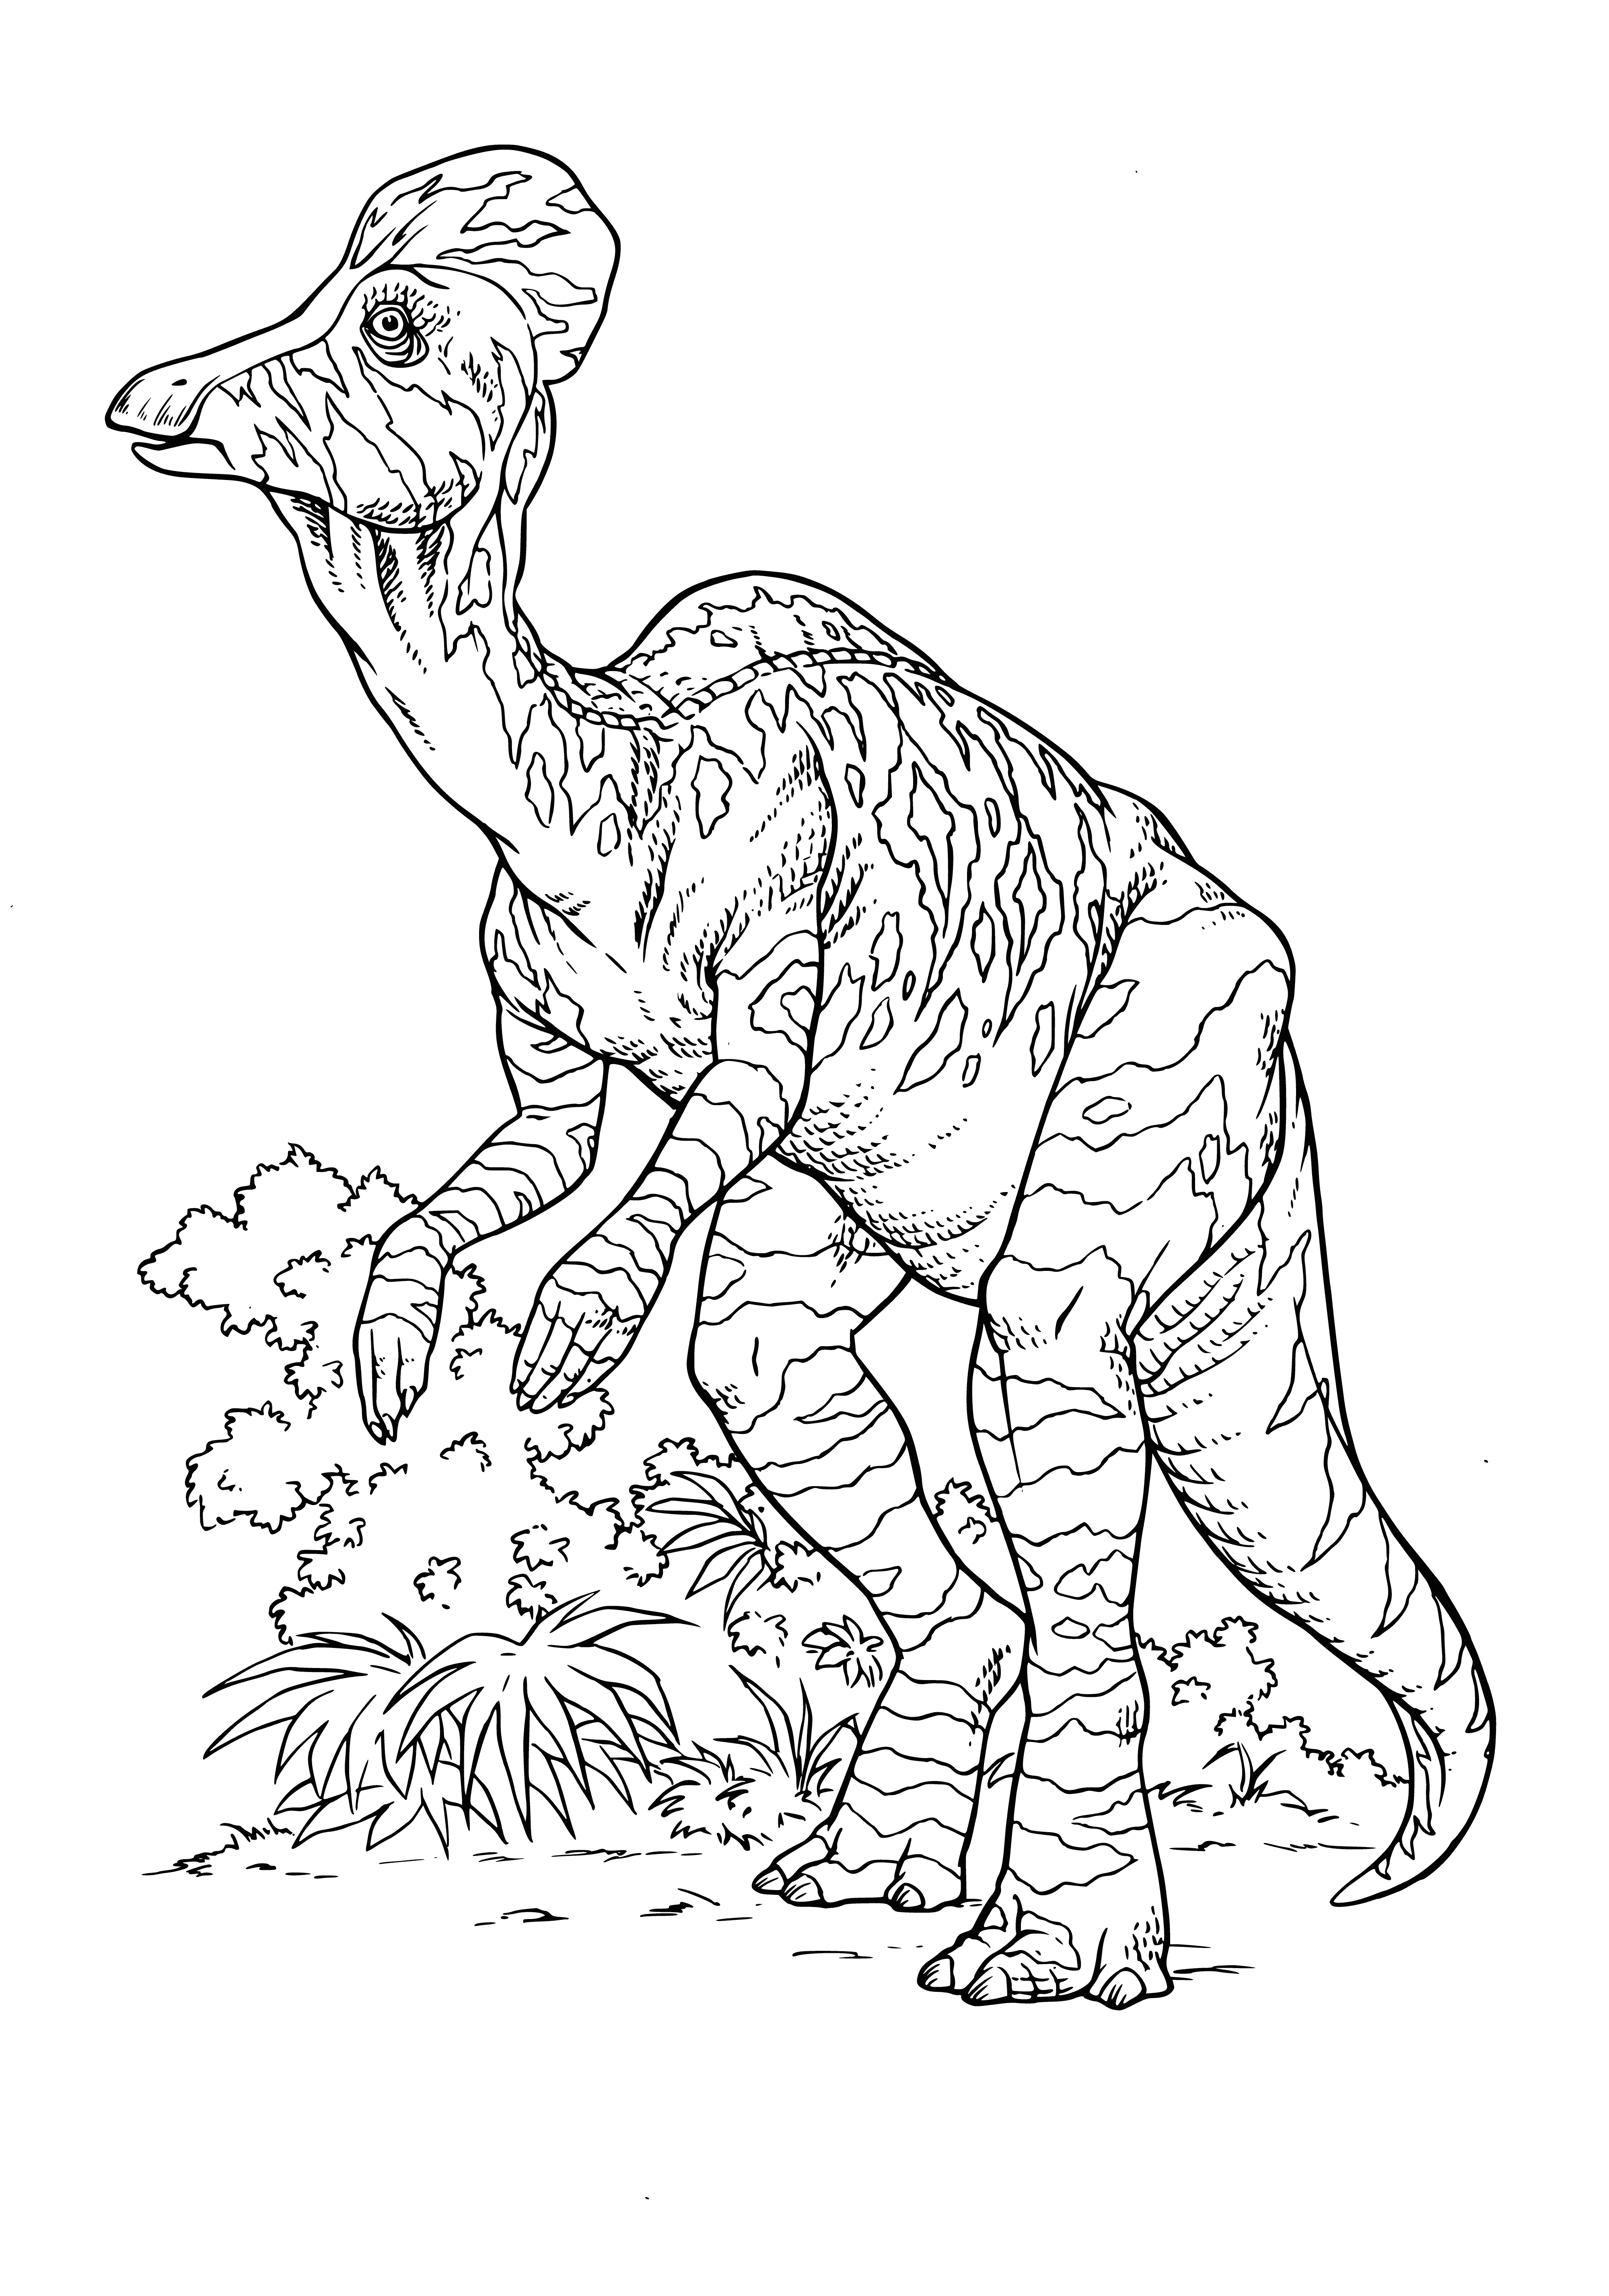 coloring page: Corytosaurus: 4 ton, 30' long dinosaur with a frill of bone. Likely lived in herds & ate leaves from tall trees, size of a school bus.